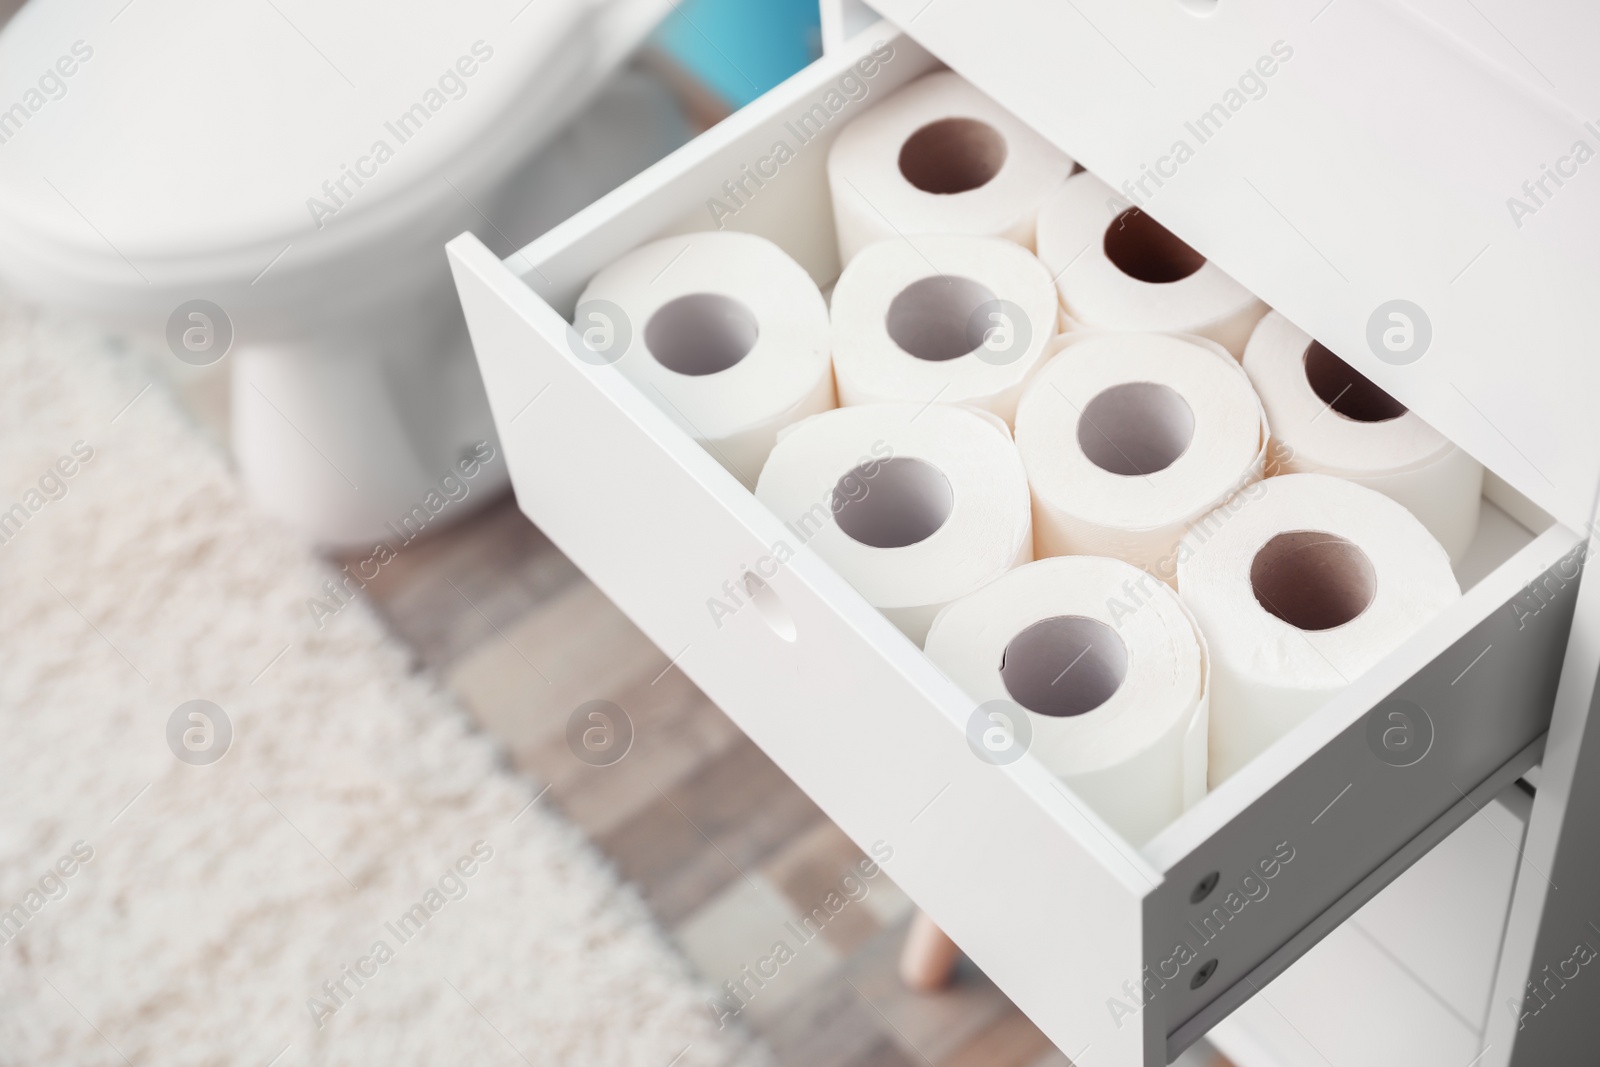 Photo of Open cabinet drawer with toilet paper rolls in bathroom